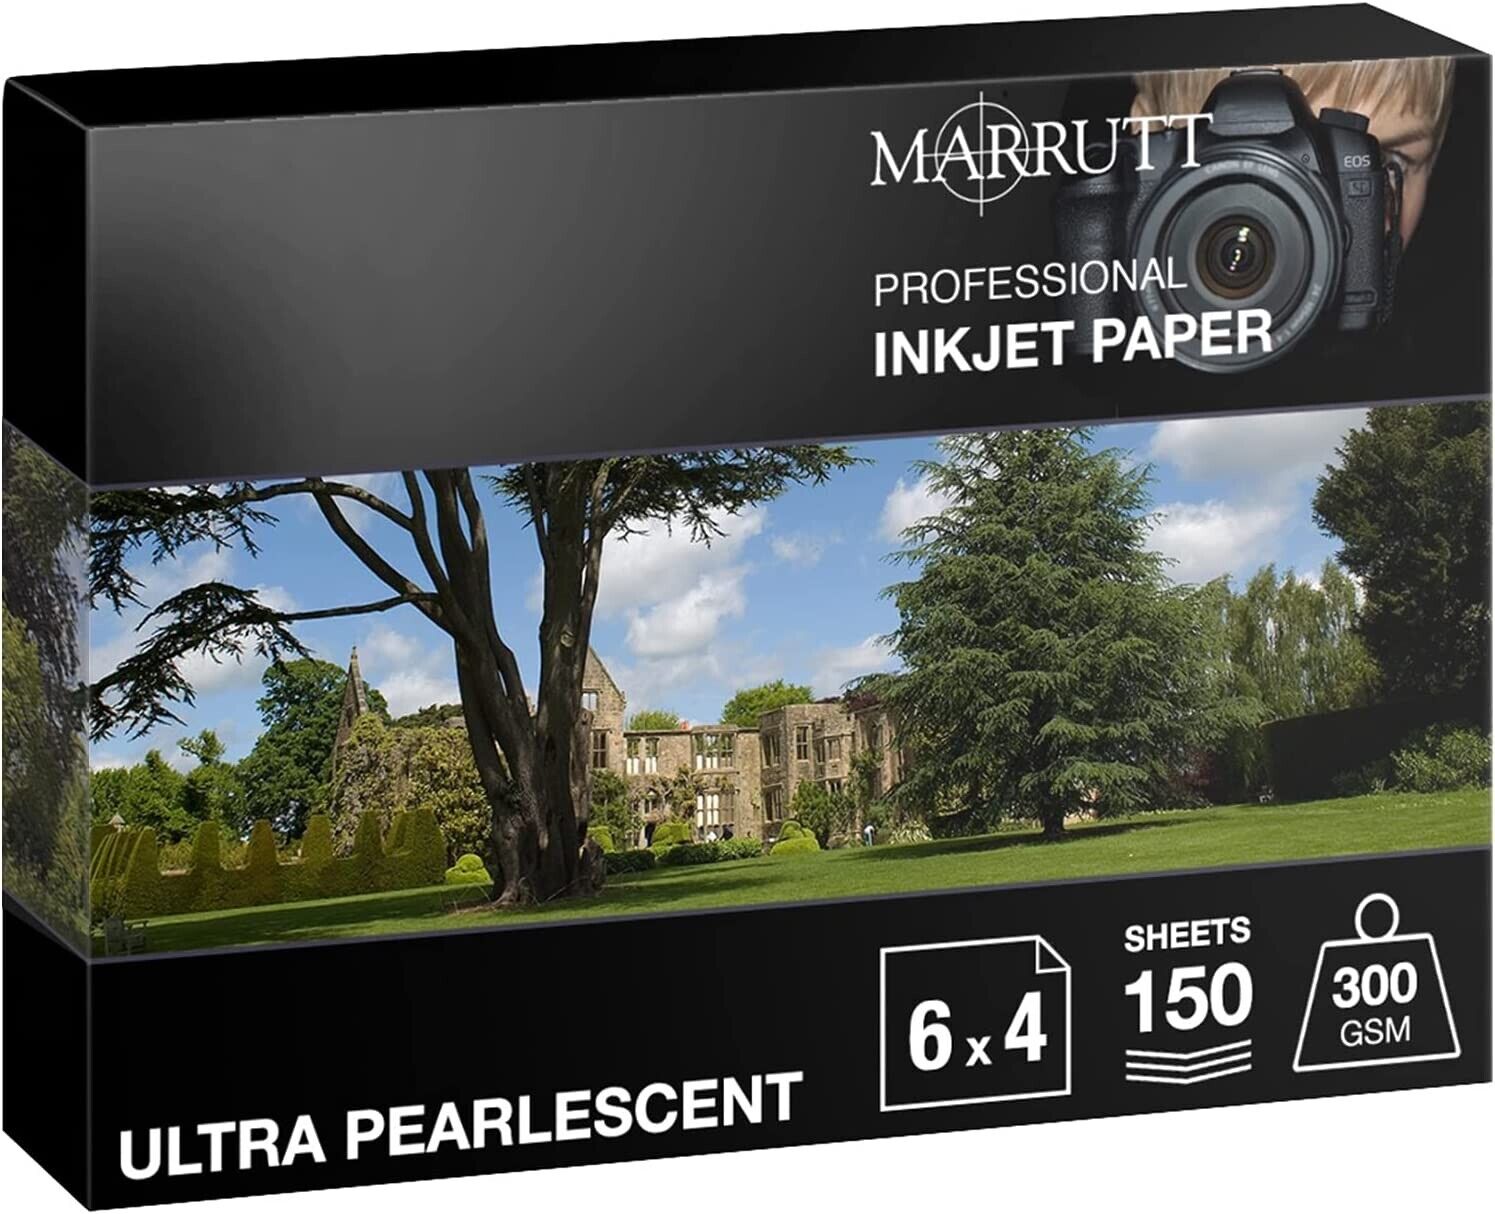 Marrutt 300gsm Ultra Pearlescent Hi-White - 6 x 4 Inches, 150 Sheets